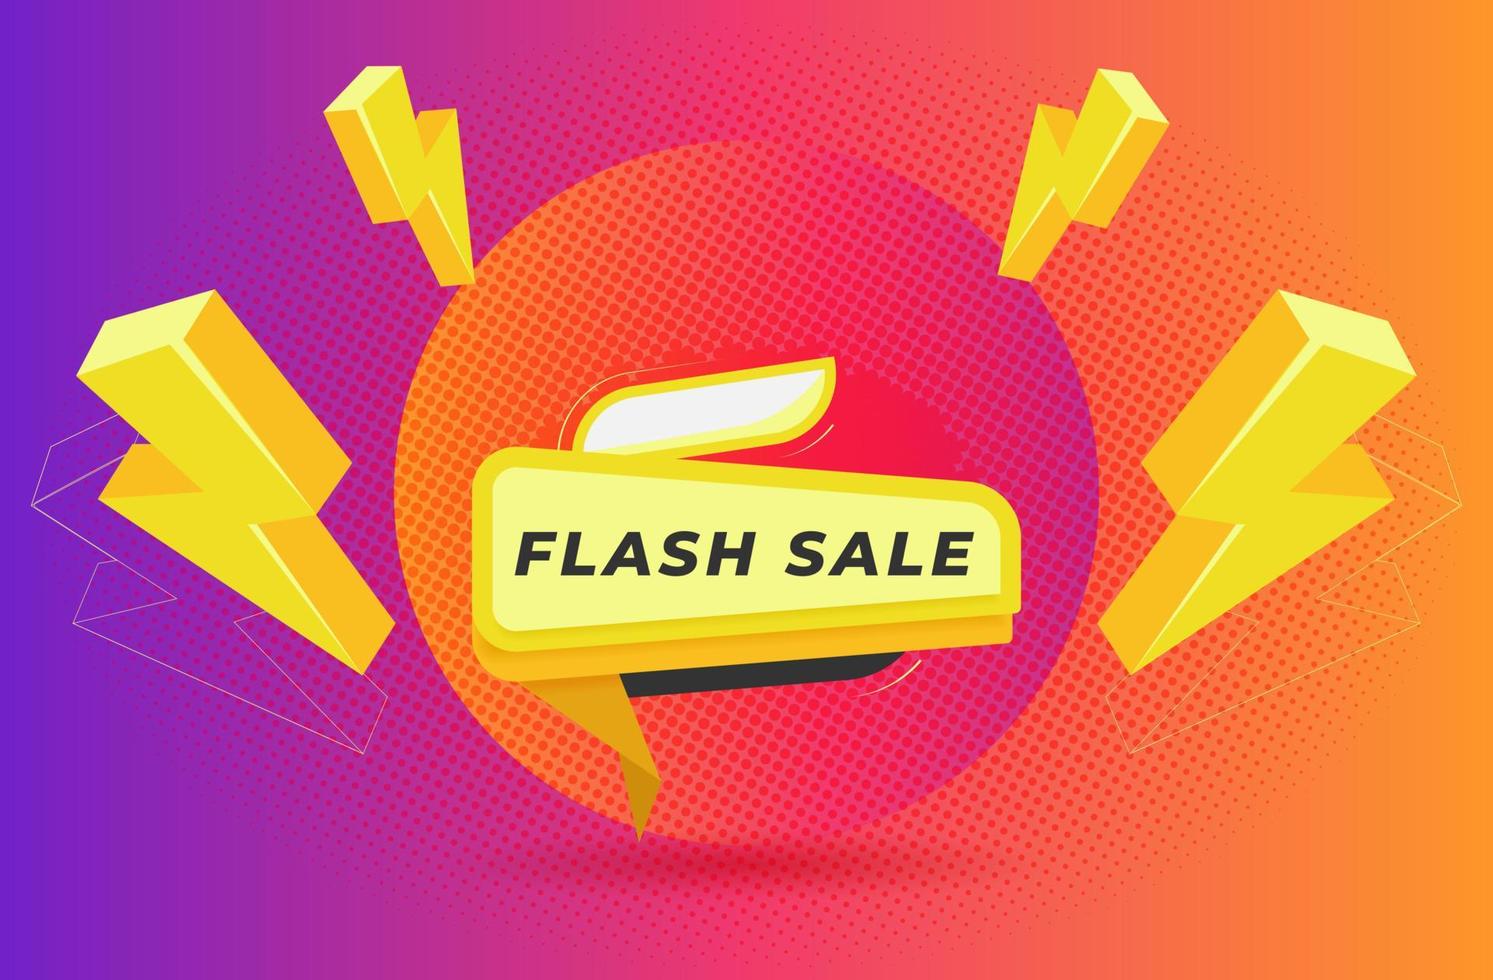 Flash Sale Shopping Poster or banner with Flash icon and text and gradient background. Flash Sales banner template design for social media and l Offer Flash Sale vector